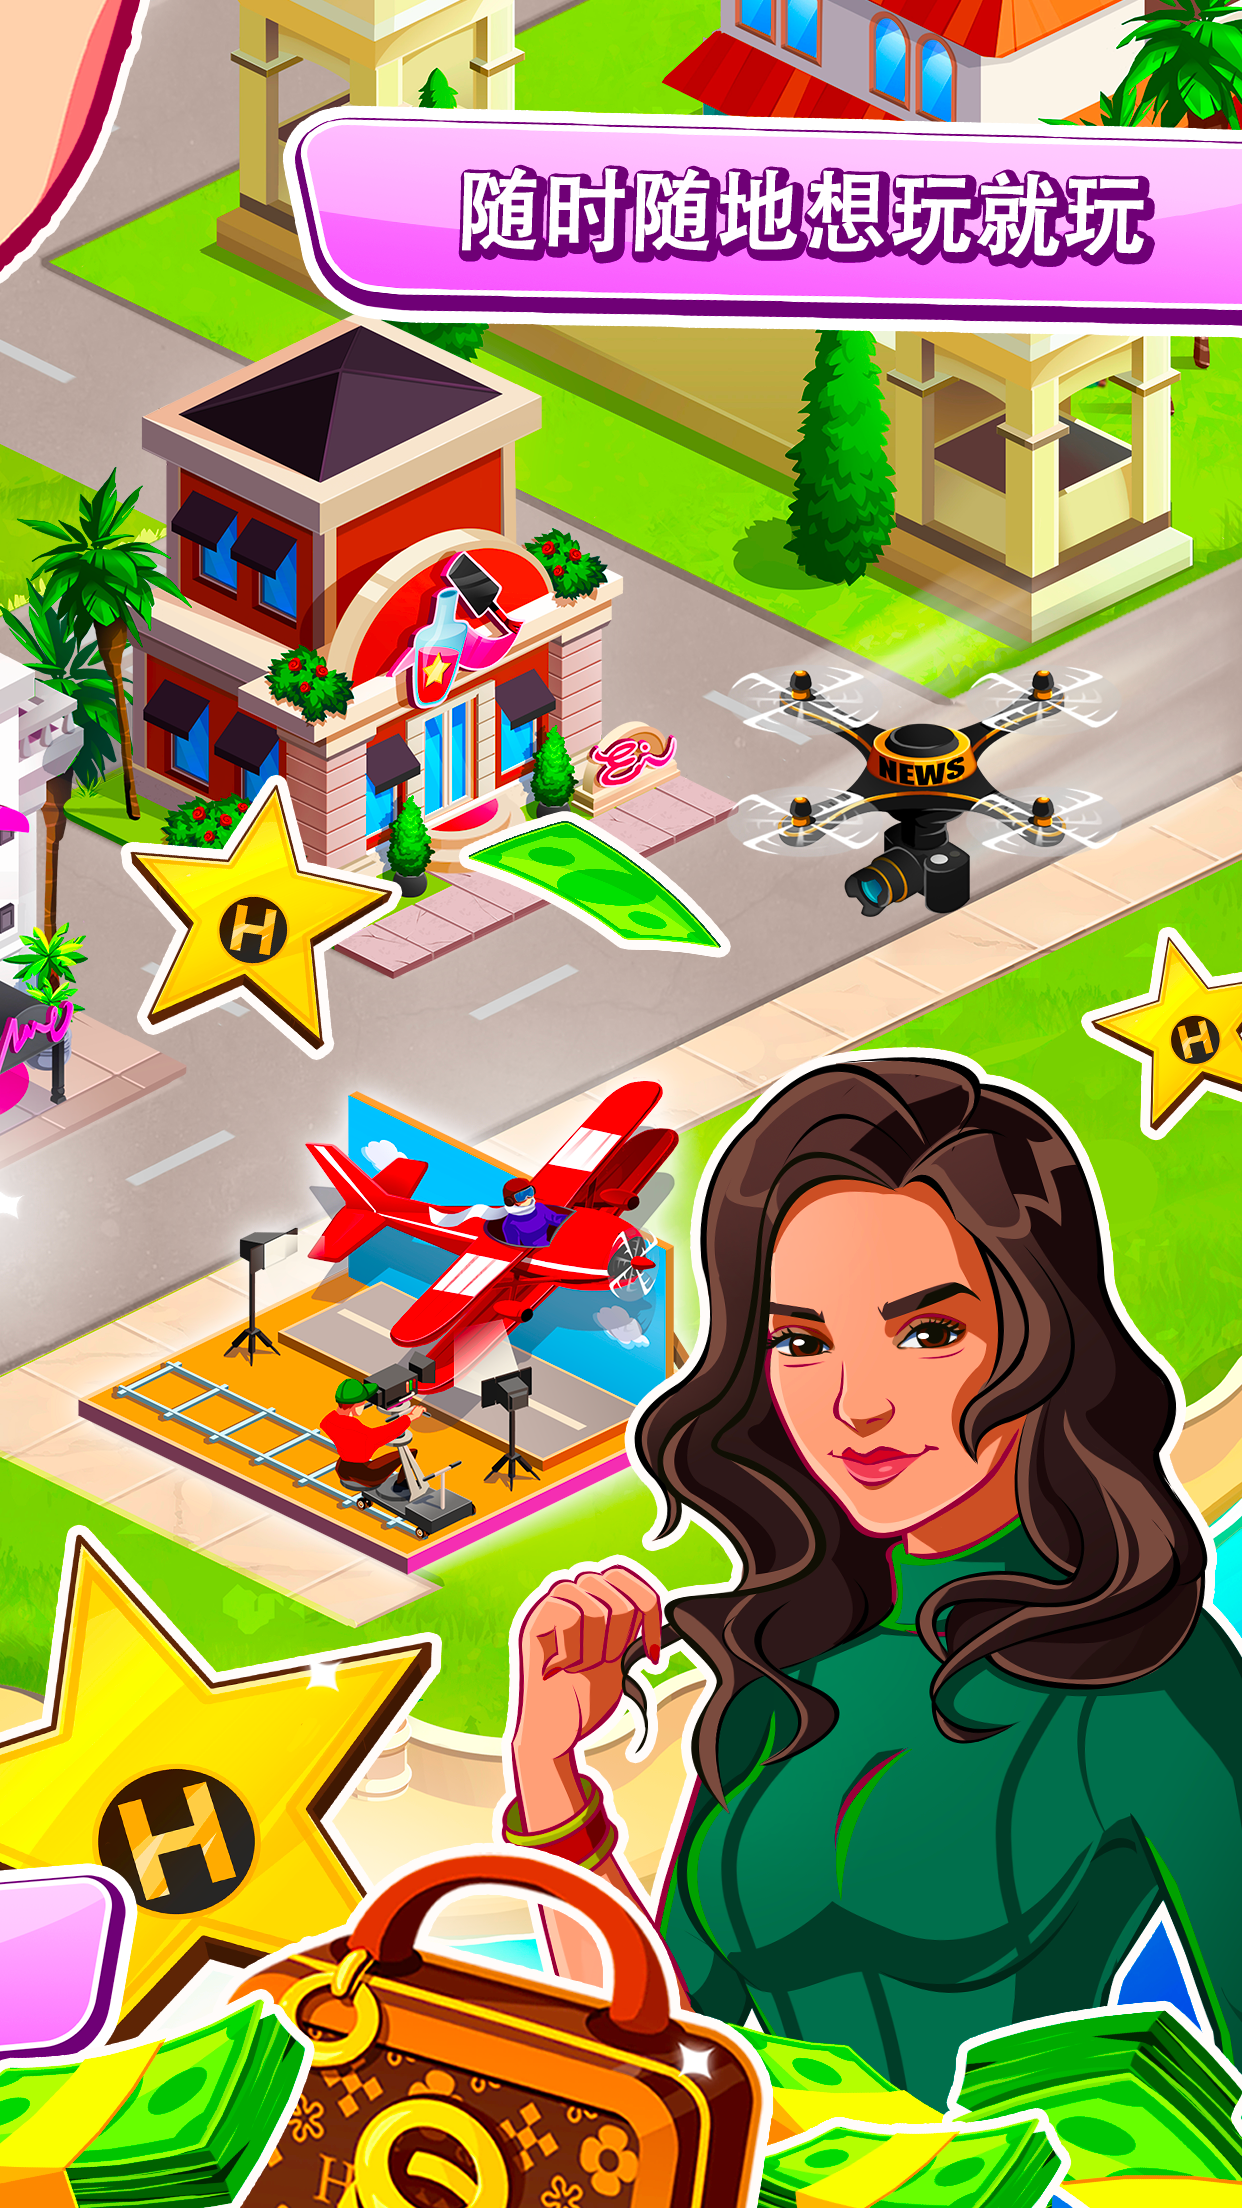 Project Fame: Idle Hollywood Game for Glam Girlsのキャプチャ